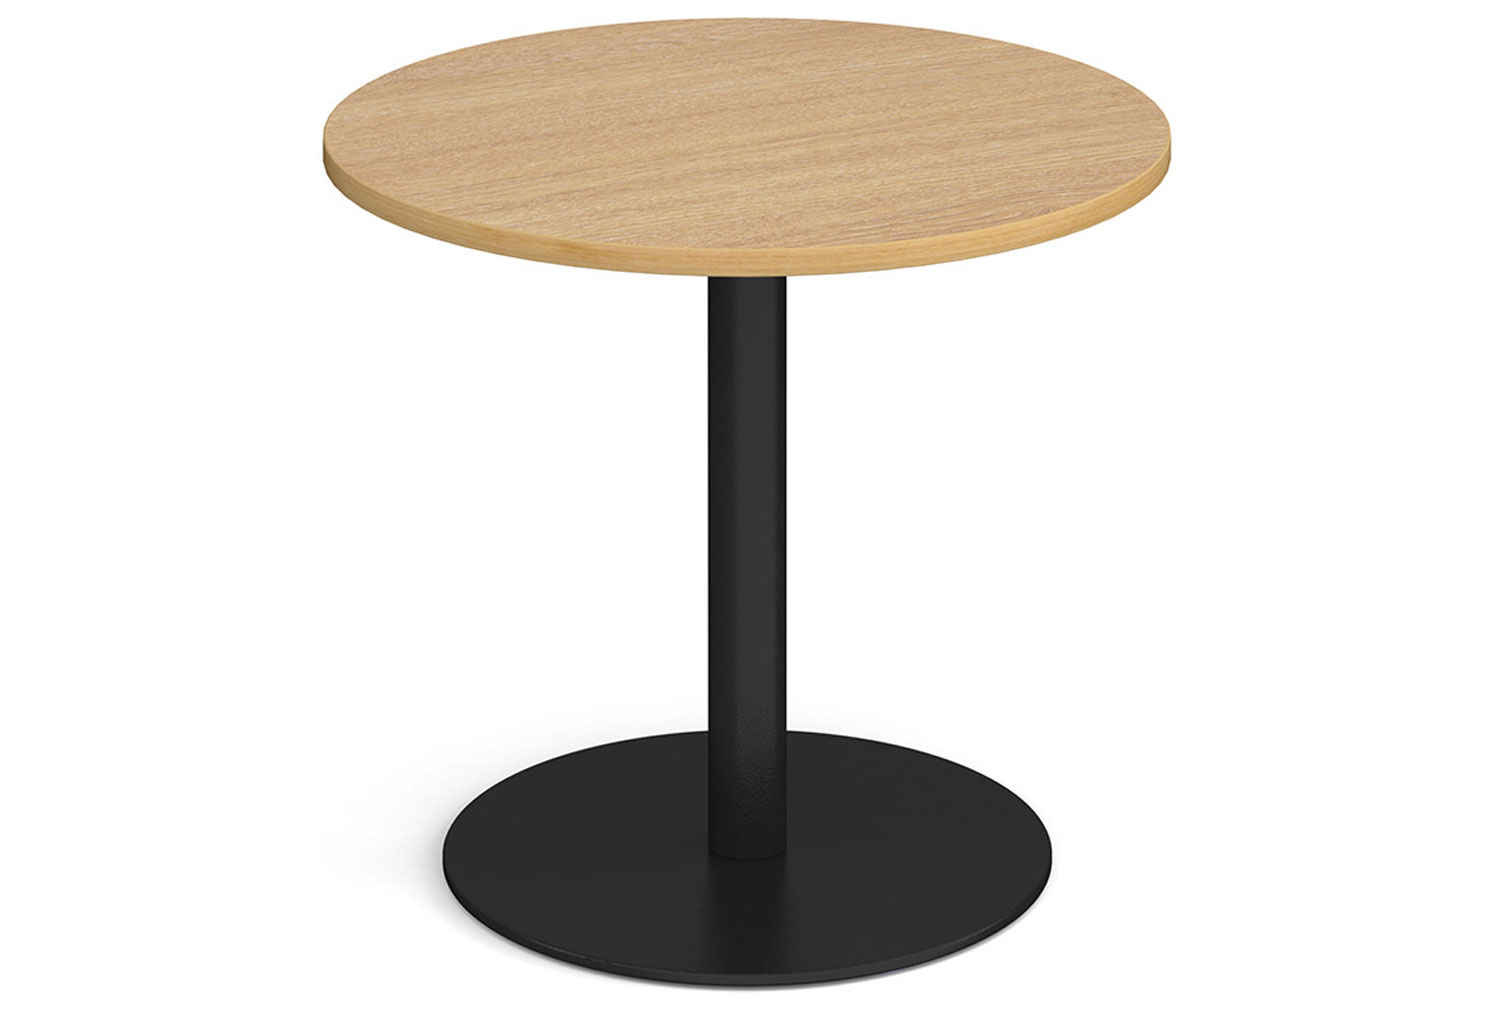 Amstel Circular Dining Table, 80diax75h (cm), Black Frame, Oak, Express Delivery